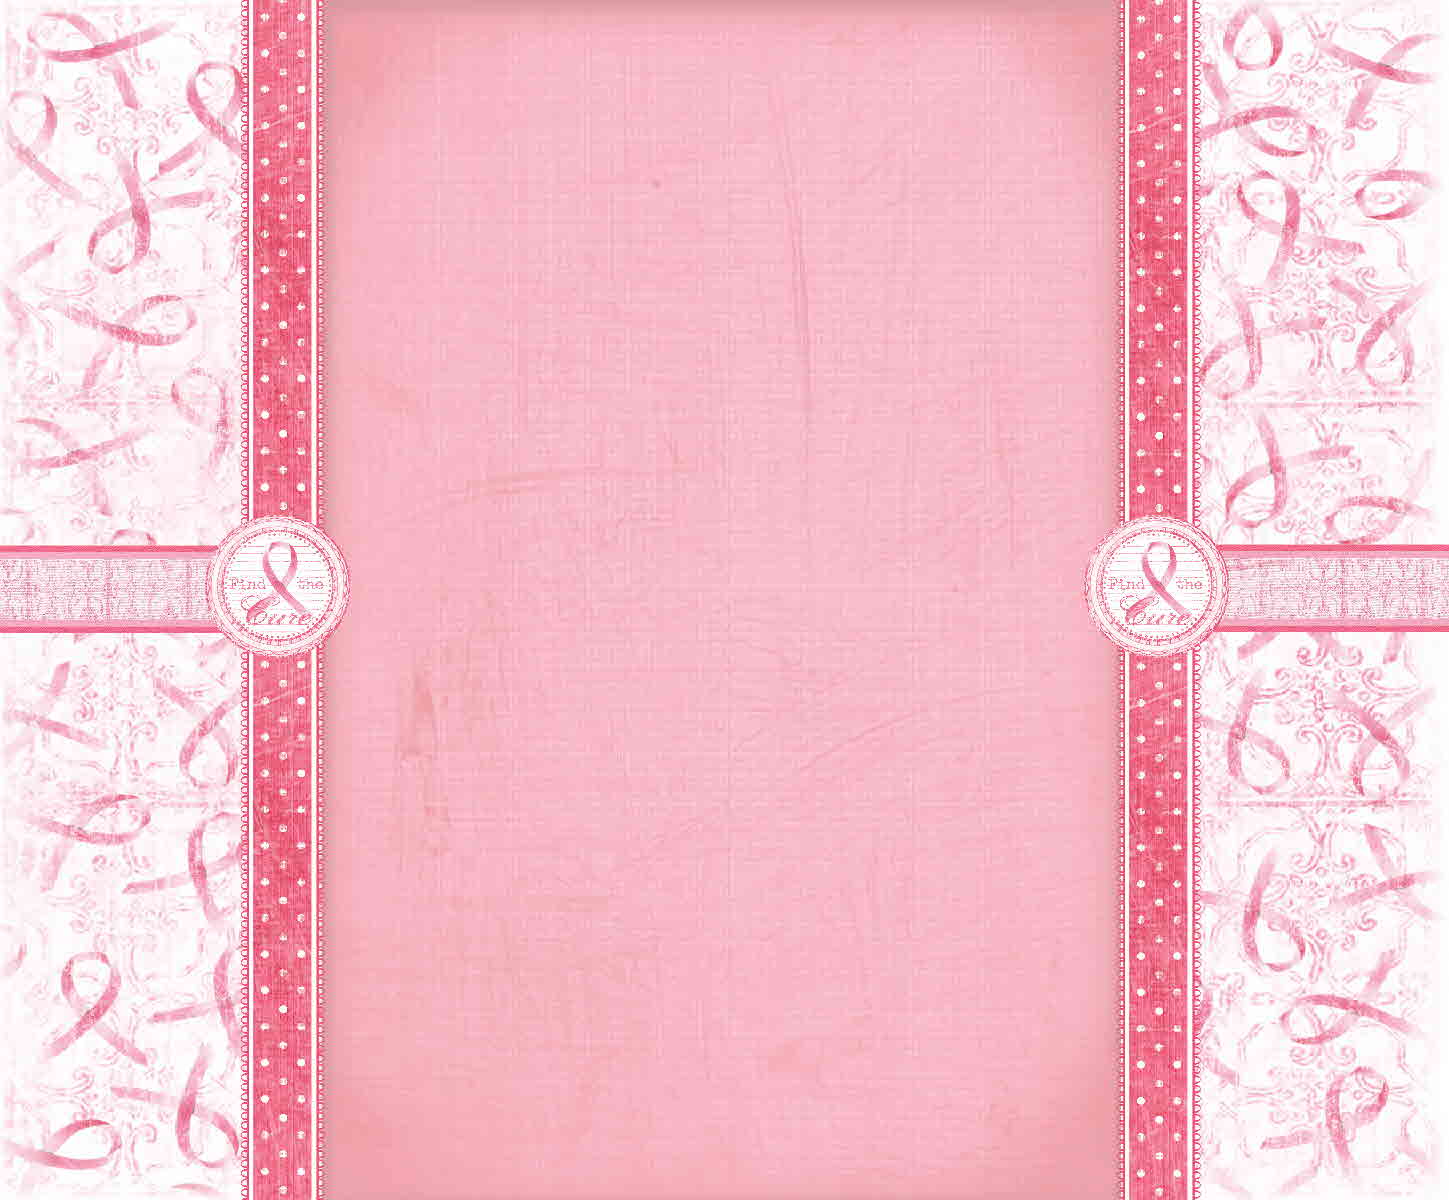 Of A Breast Cancer Awareness Ribbon Isolated On A White